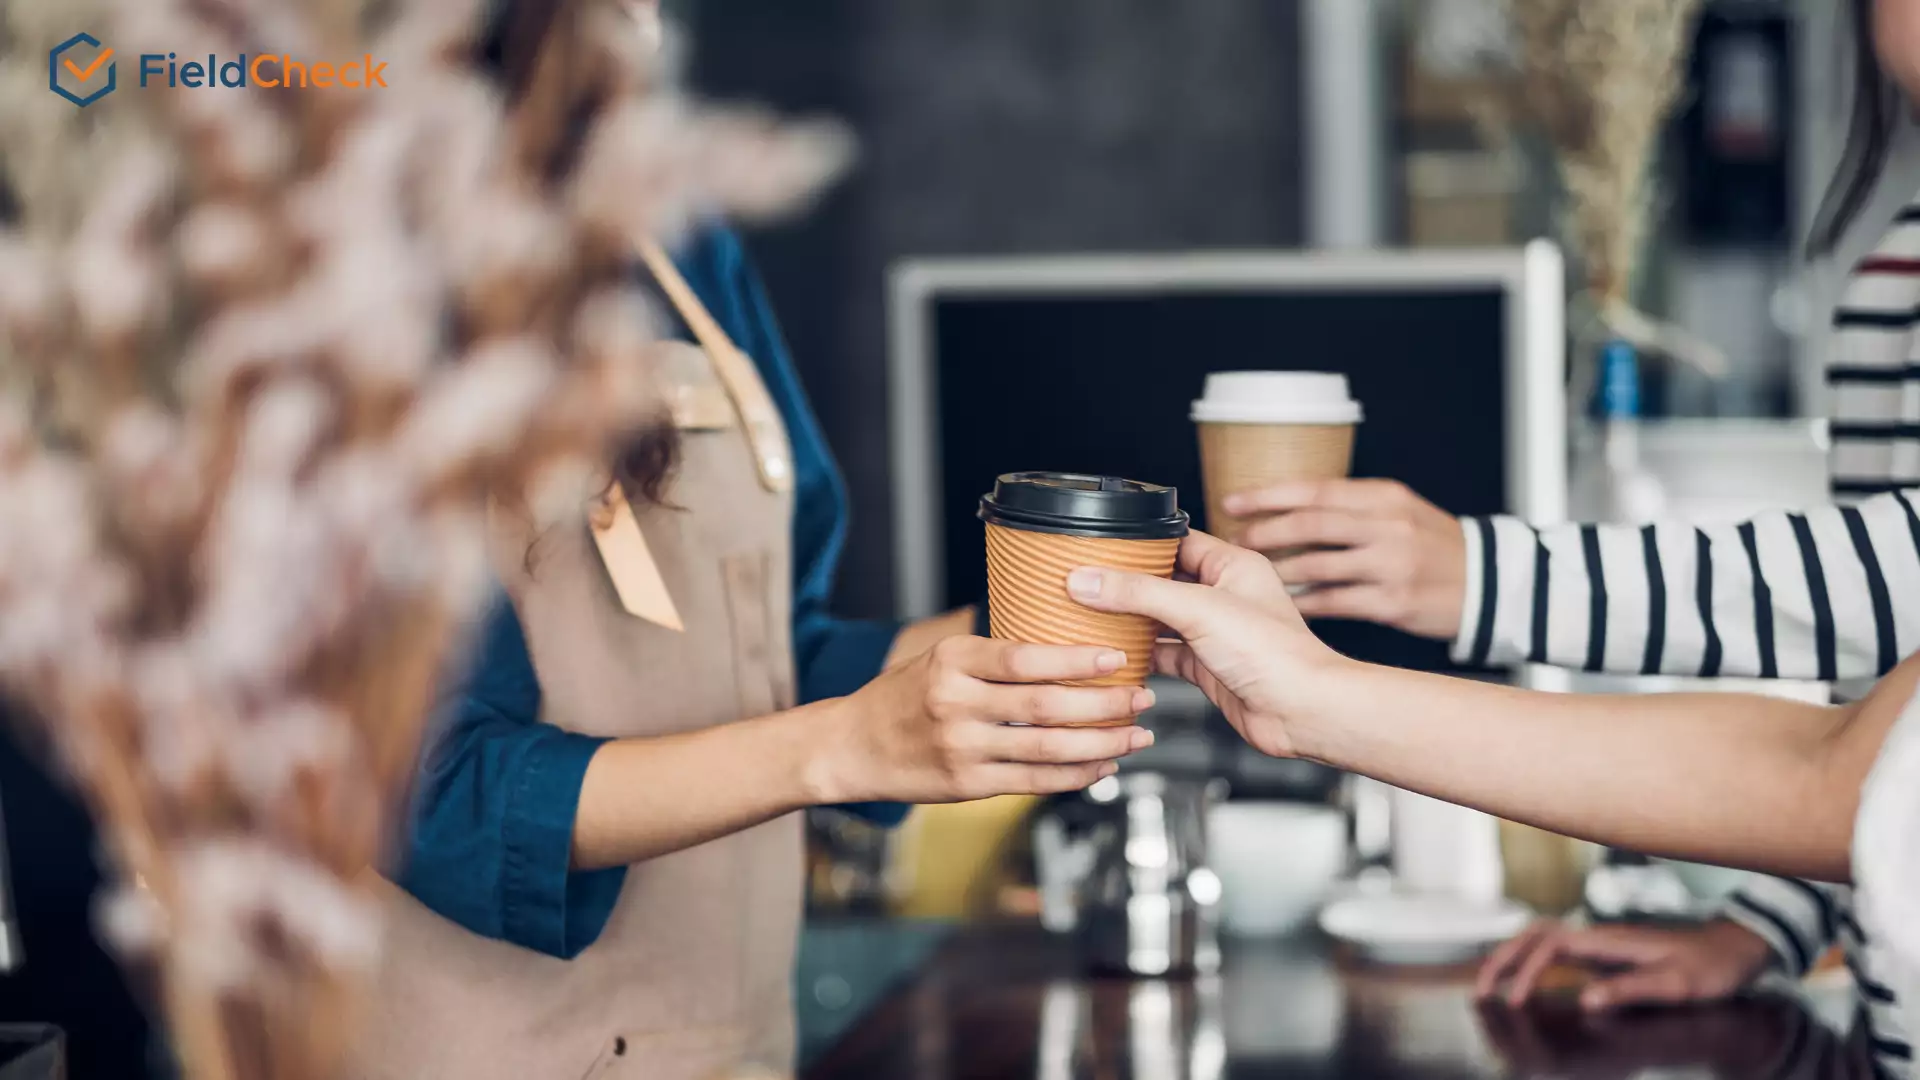 Tips For Optimal Chain Coffee Shop Management